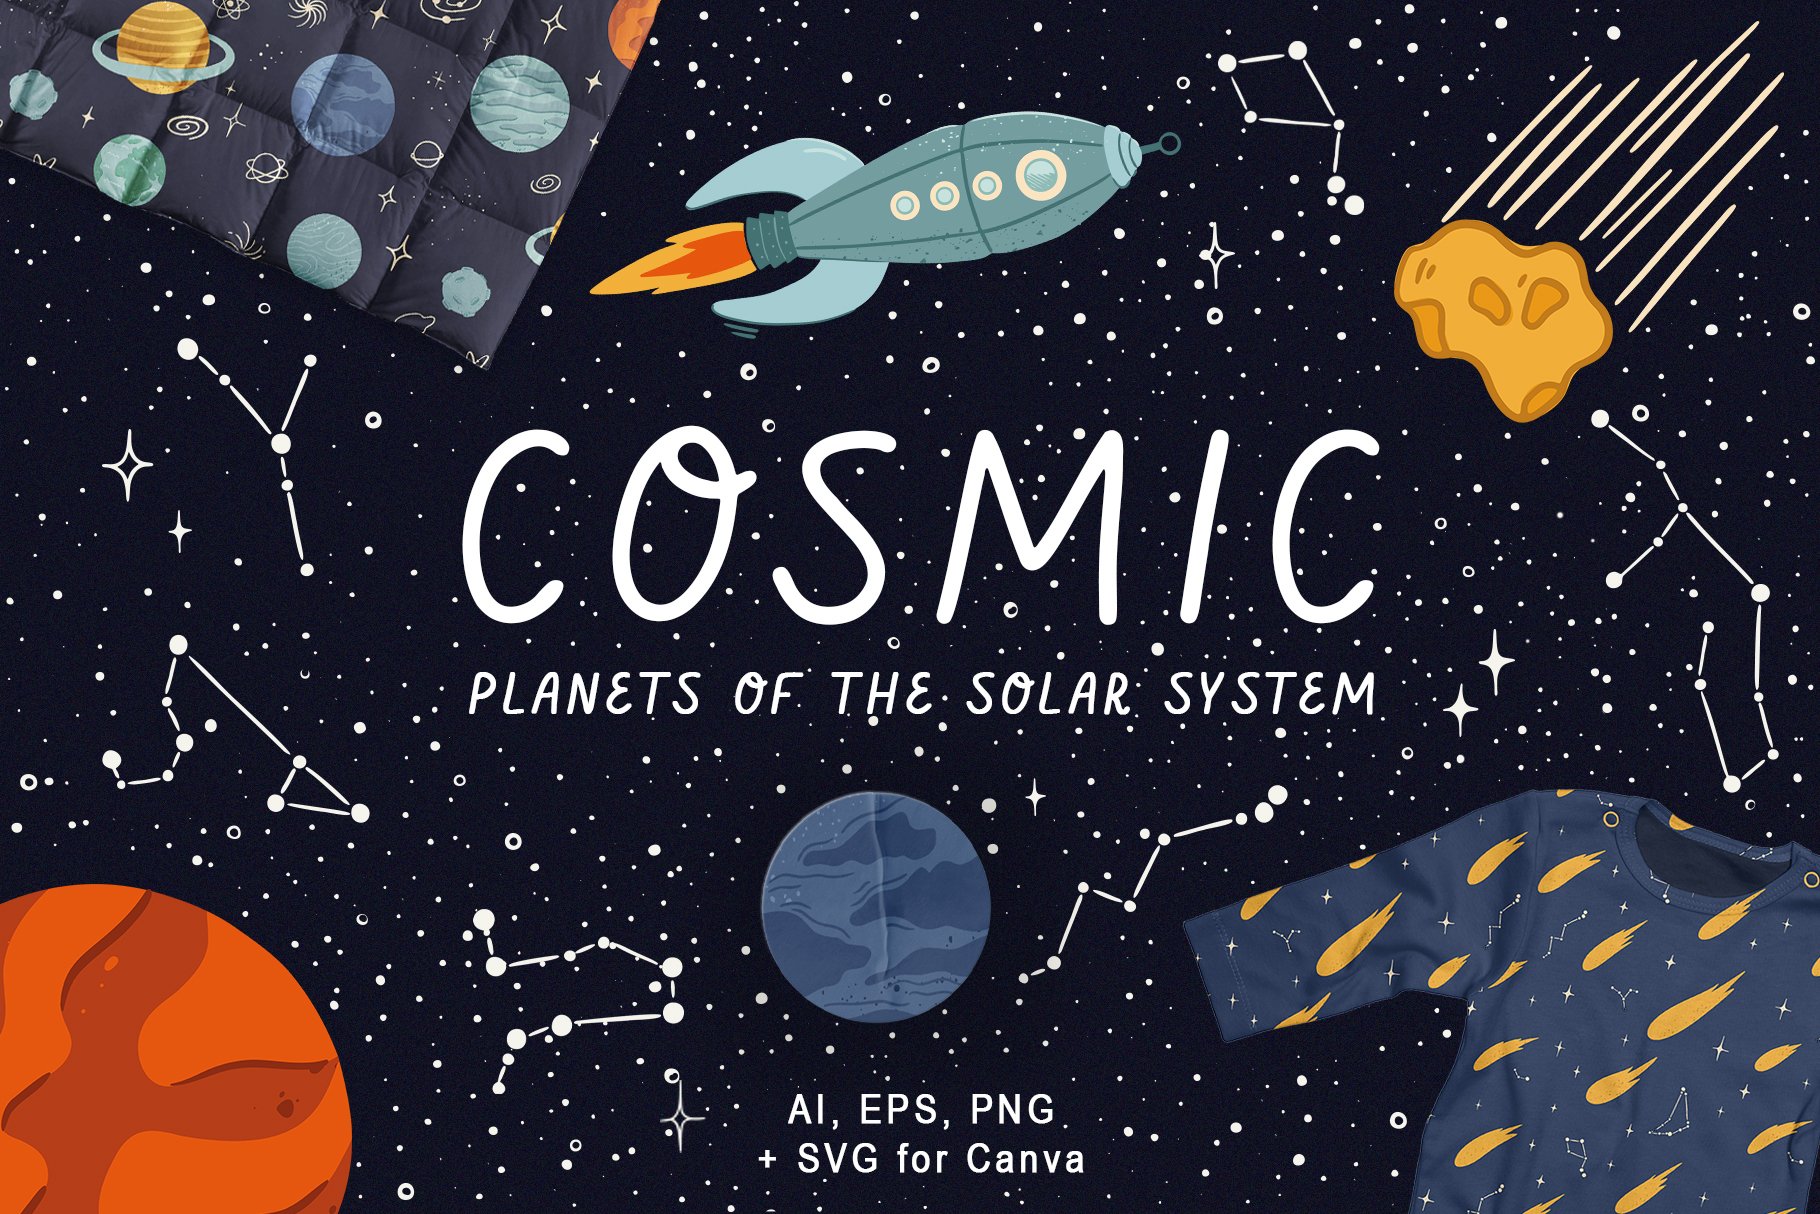 COSMIC solar system + SVG files cover image.